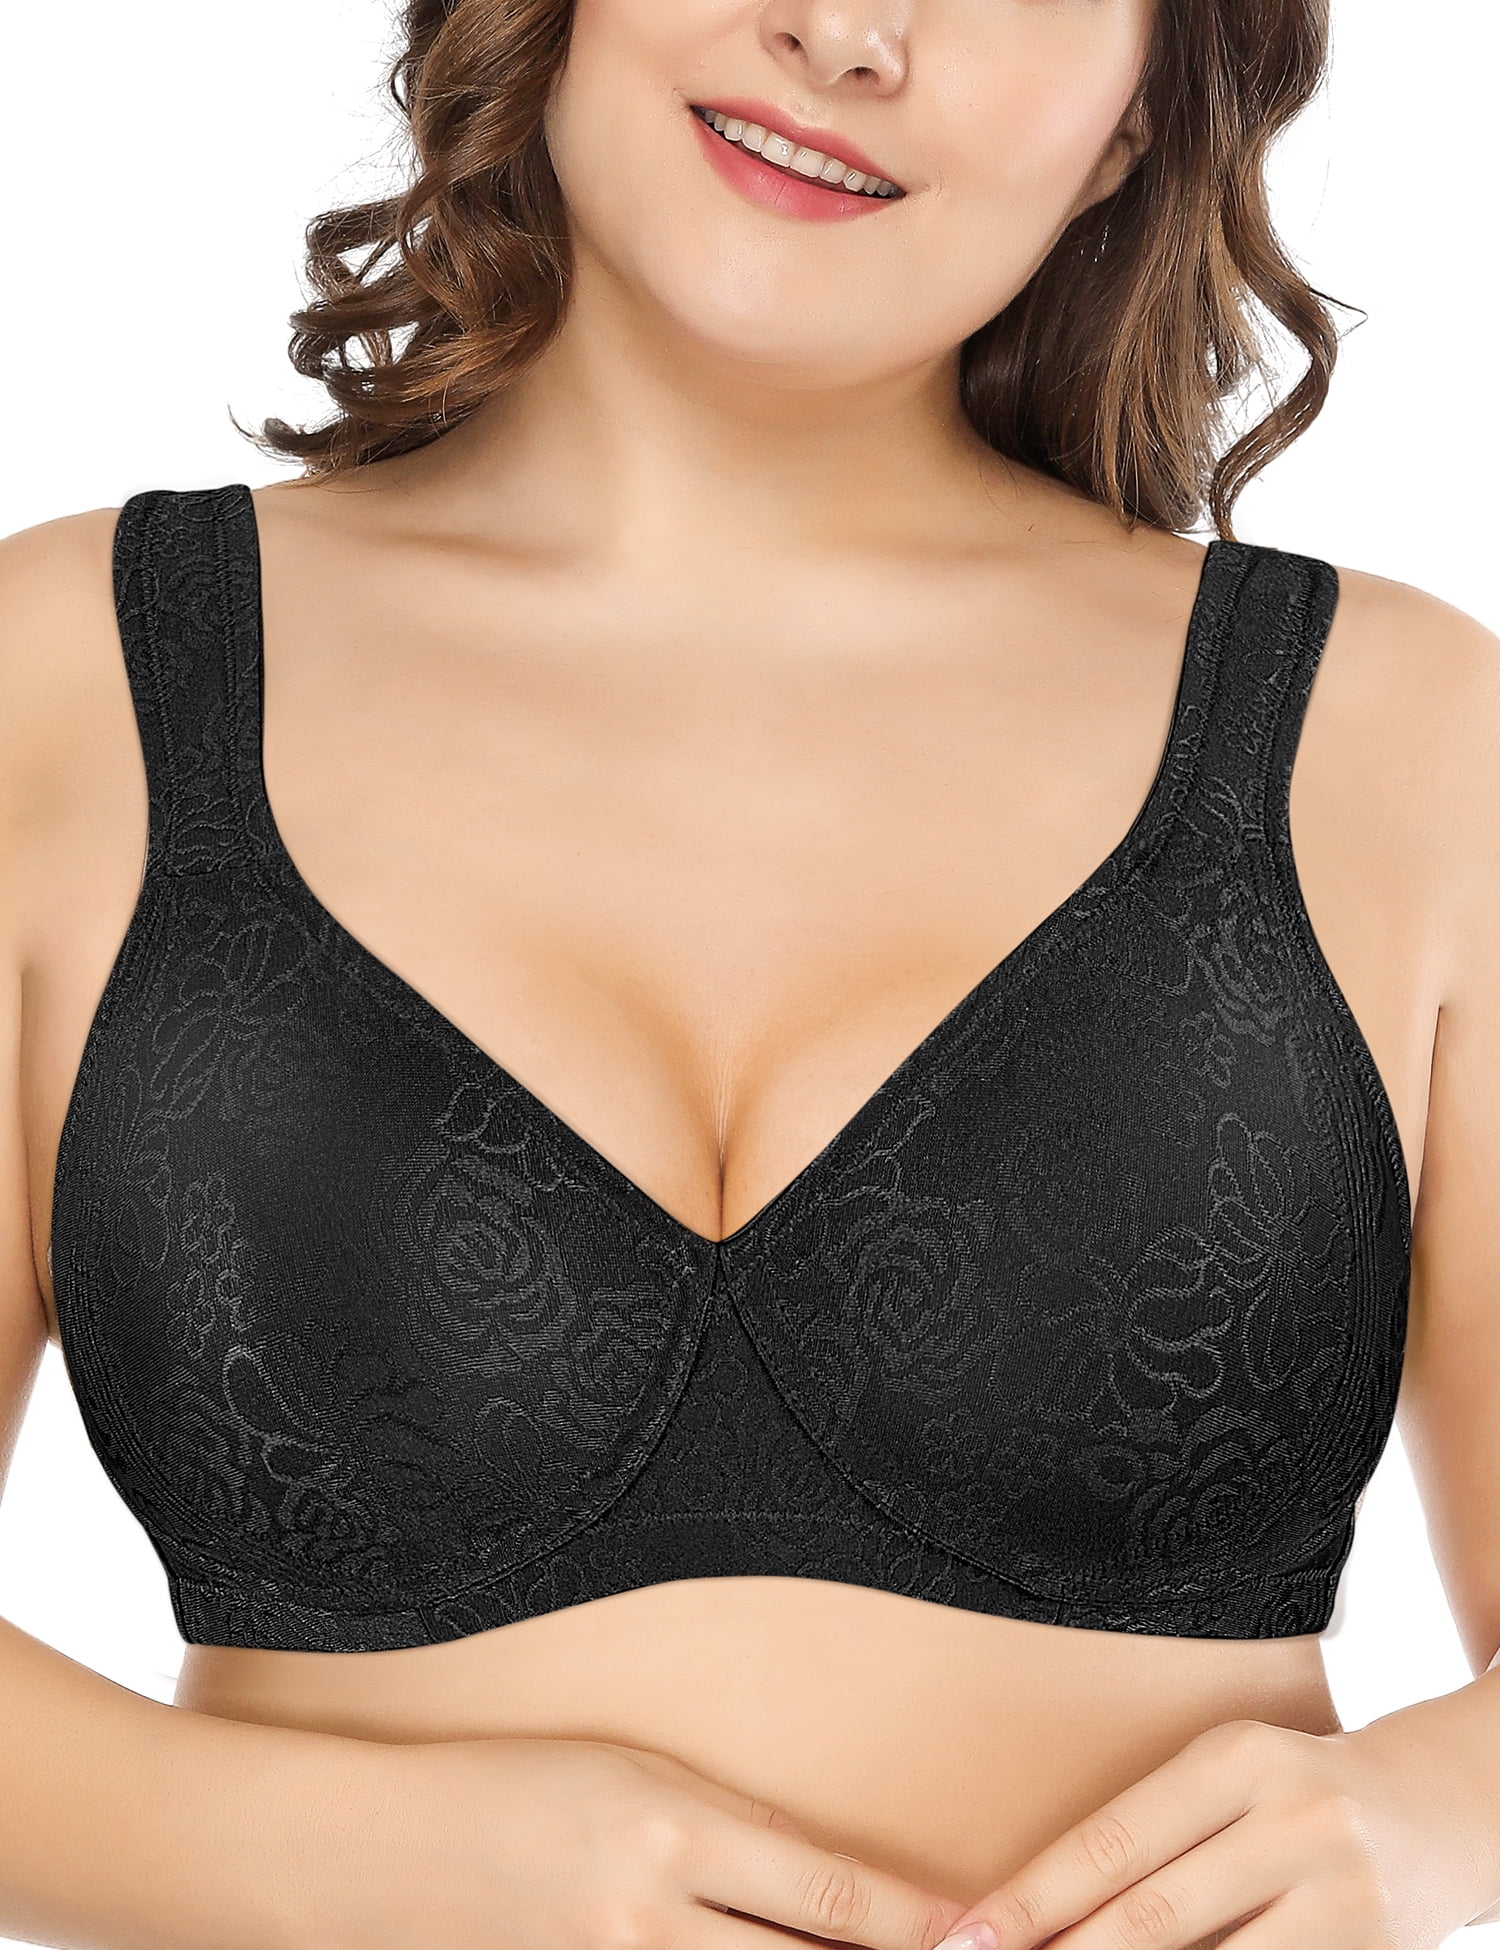 Warner's RM3911A Easy Does It No Bulge Wirefree Contour Bra